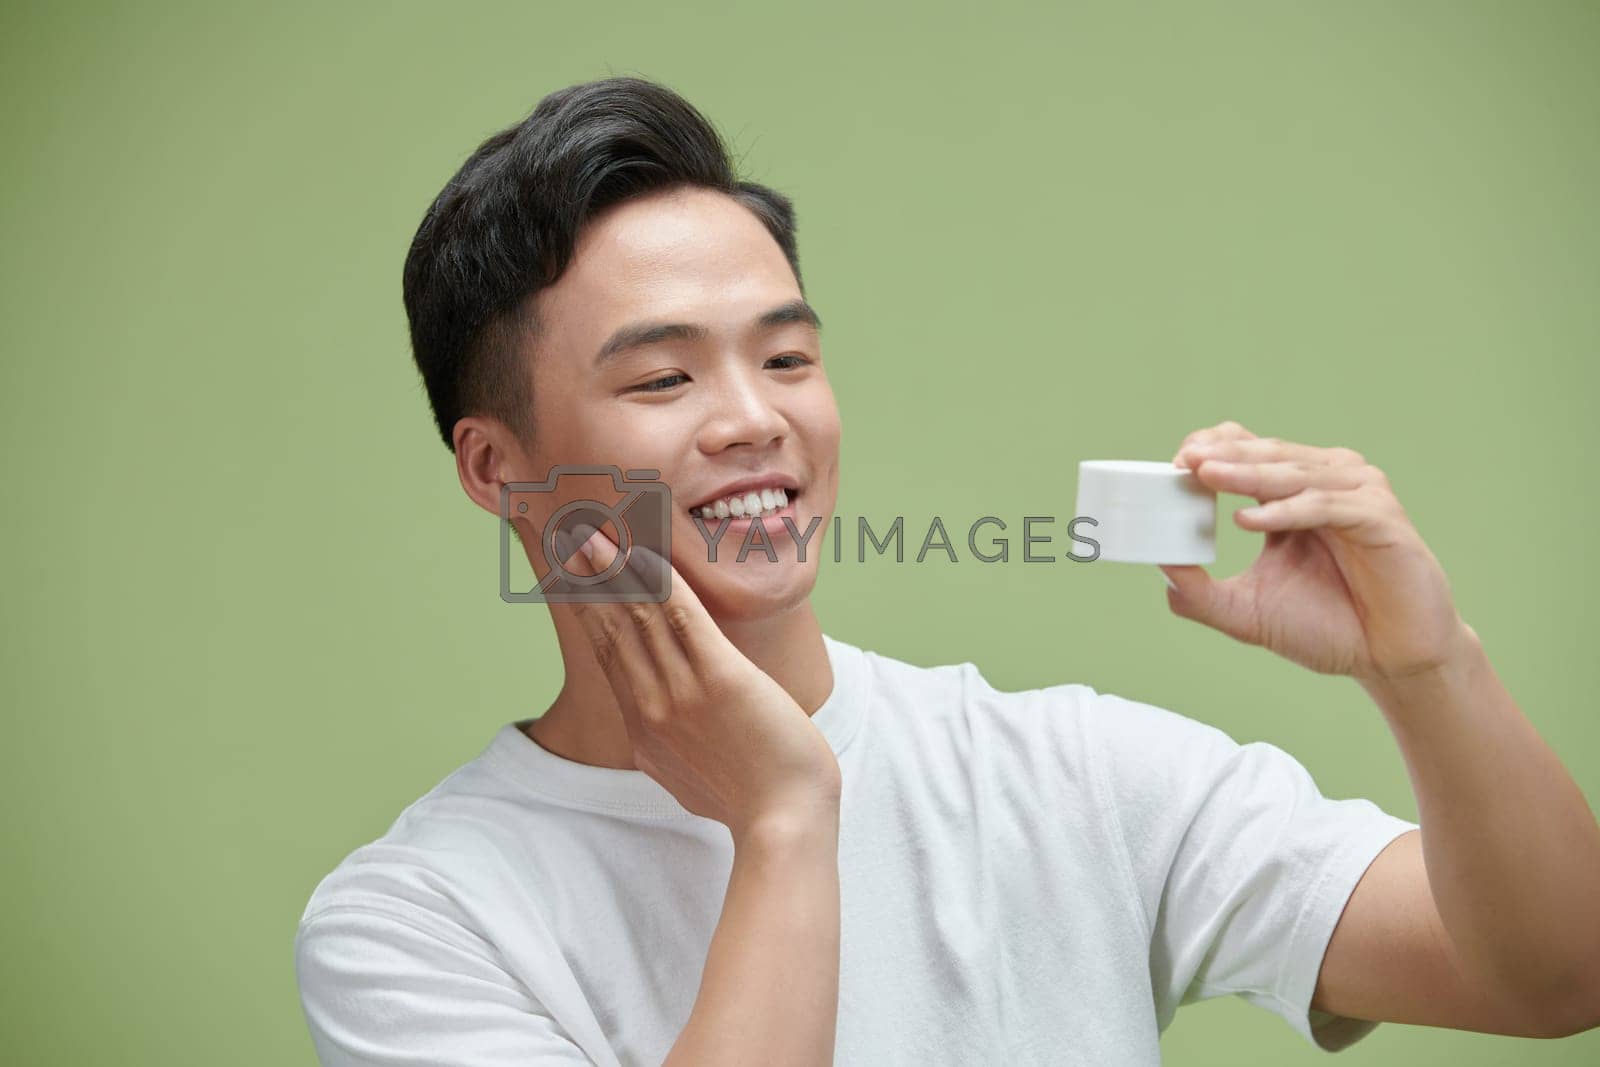 Royalty free image of Portrait of young Asian man with cosmetics bottle by makidotvn